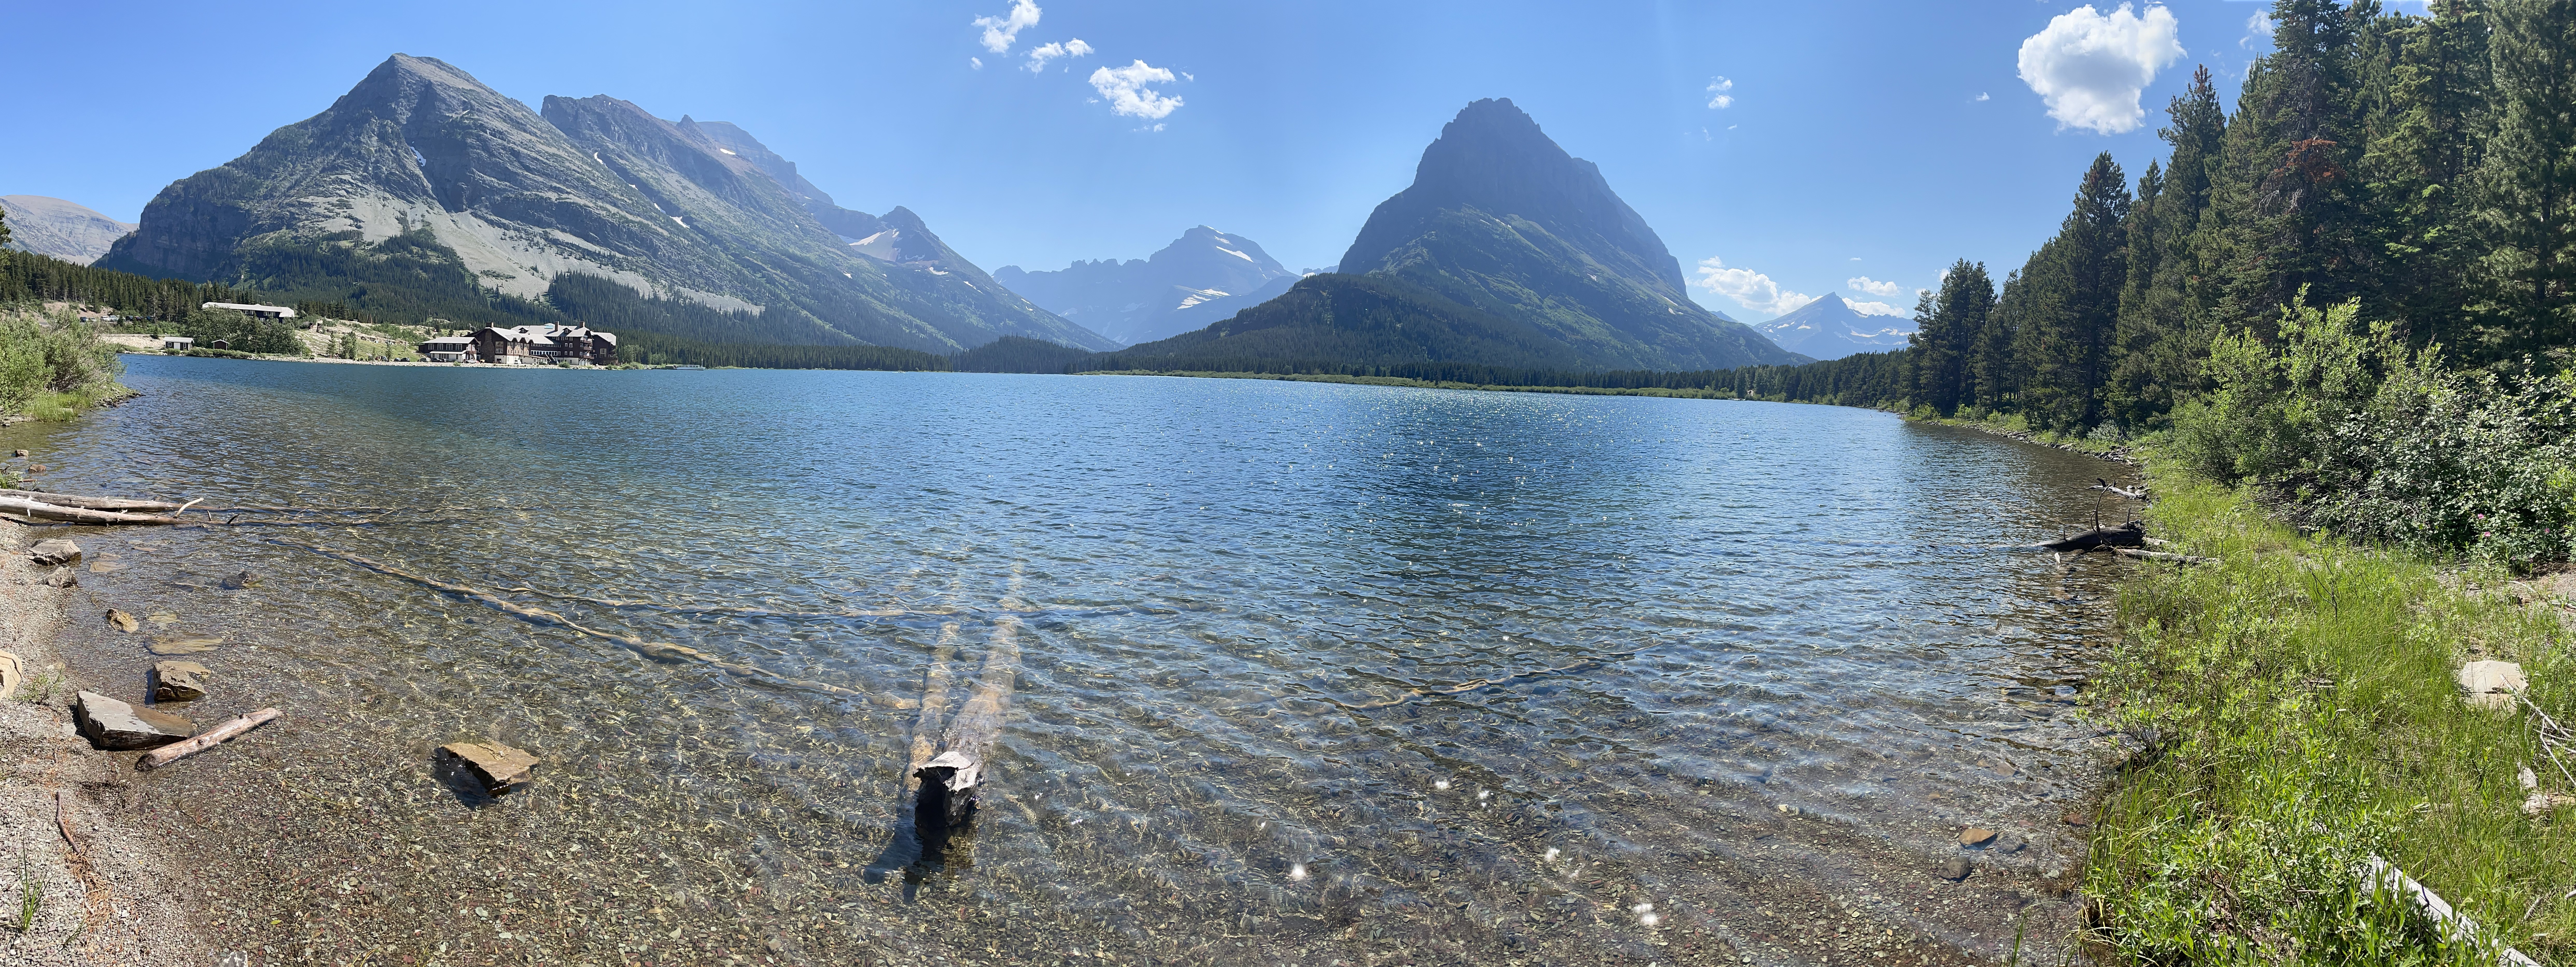 Panorama of SwiftCurrent Lake at GLacier National Park